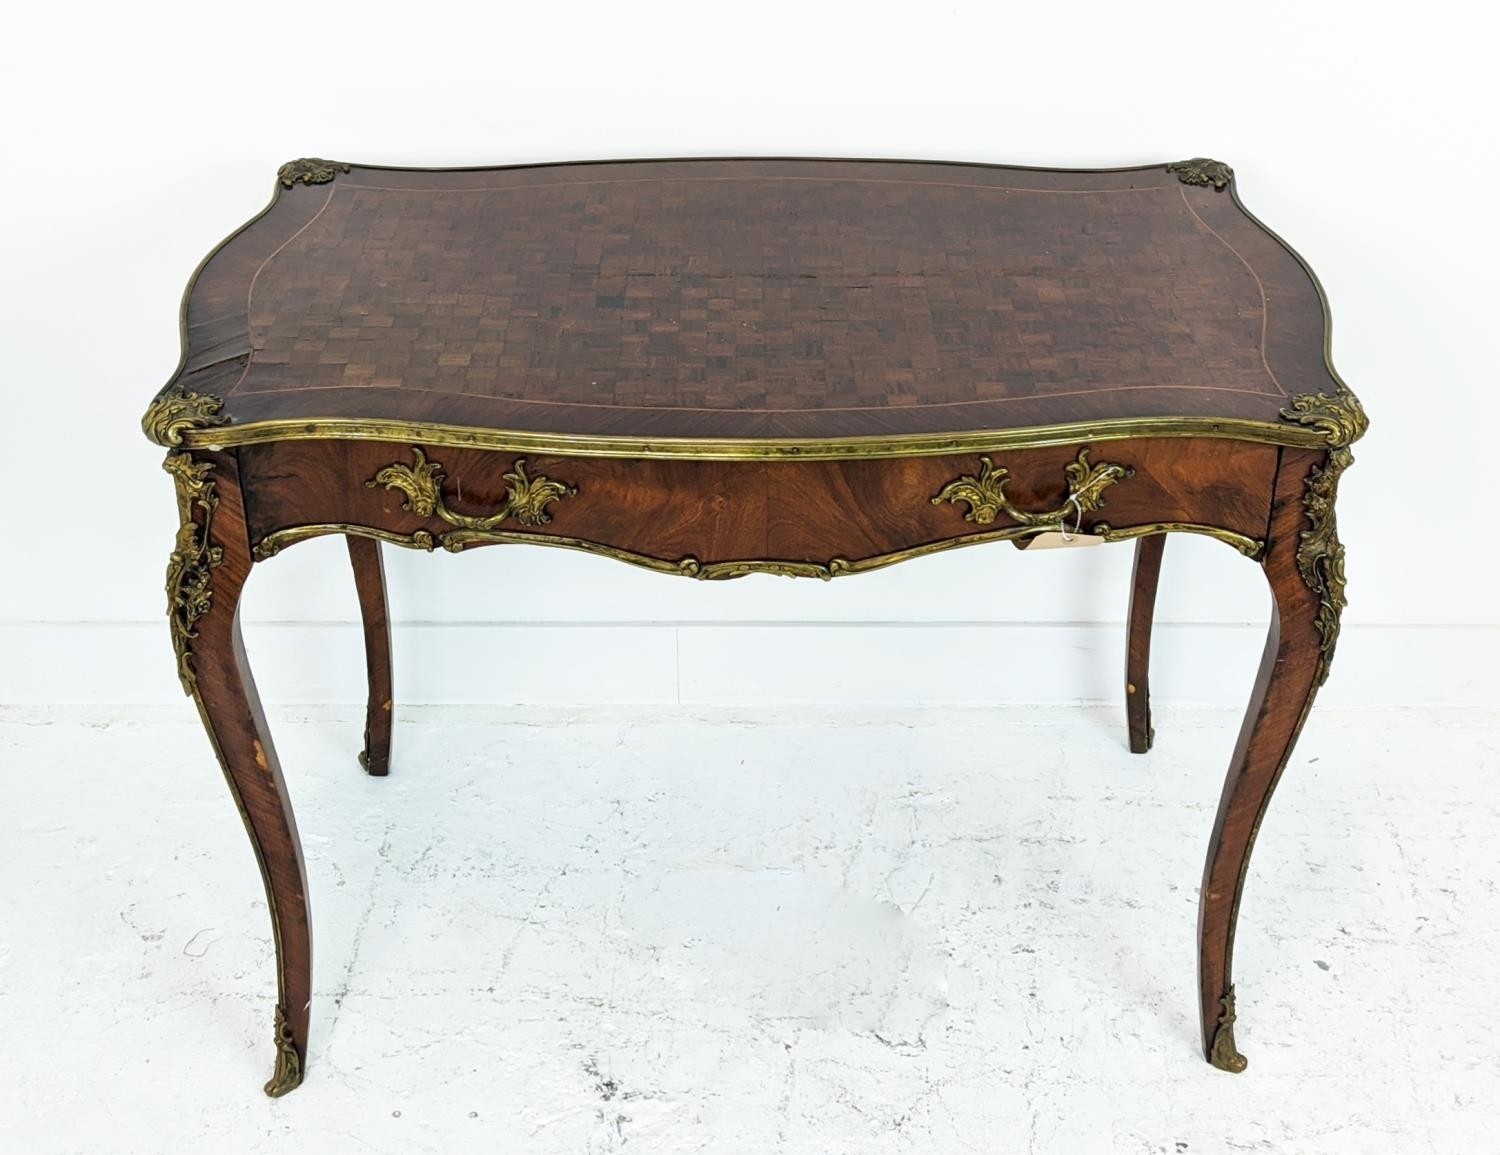 BUREAU PLAT, circa 1880, Louis XV style, French parquetry with ormolu mounts single long drawer - Image 4 of 22